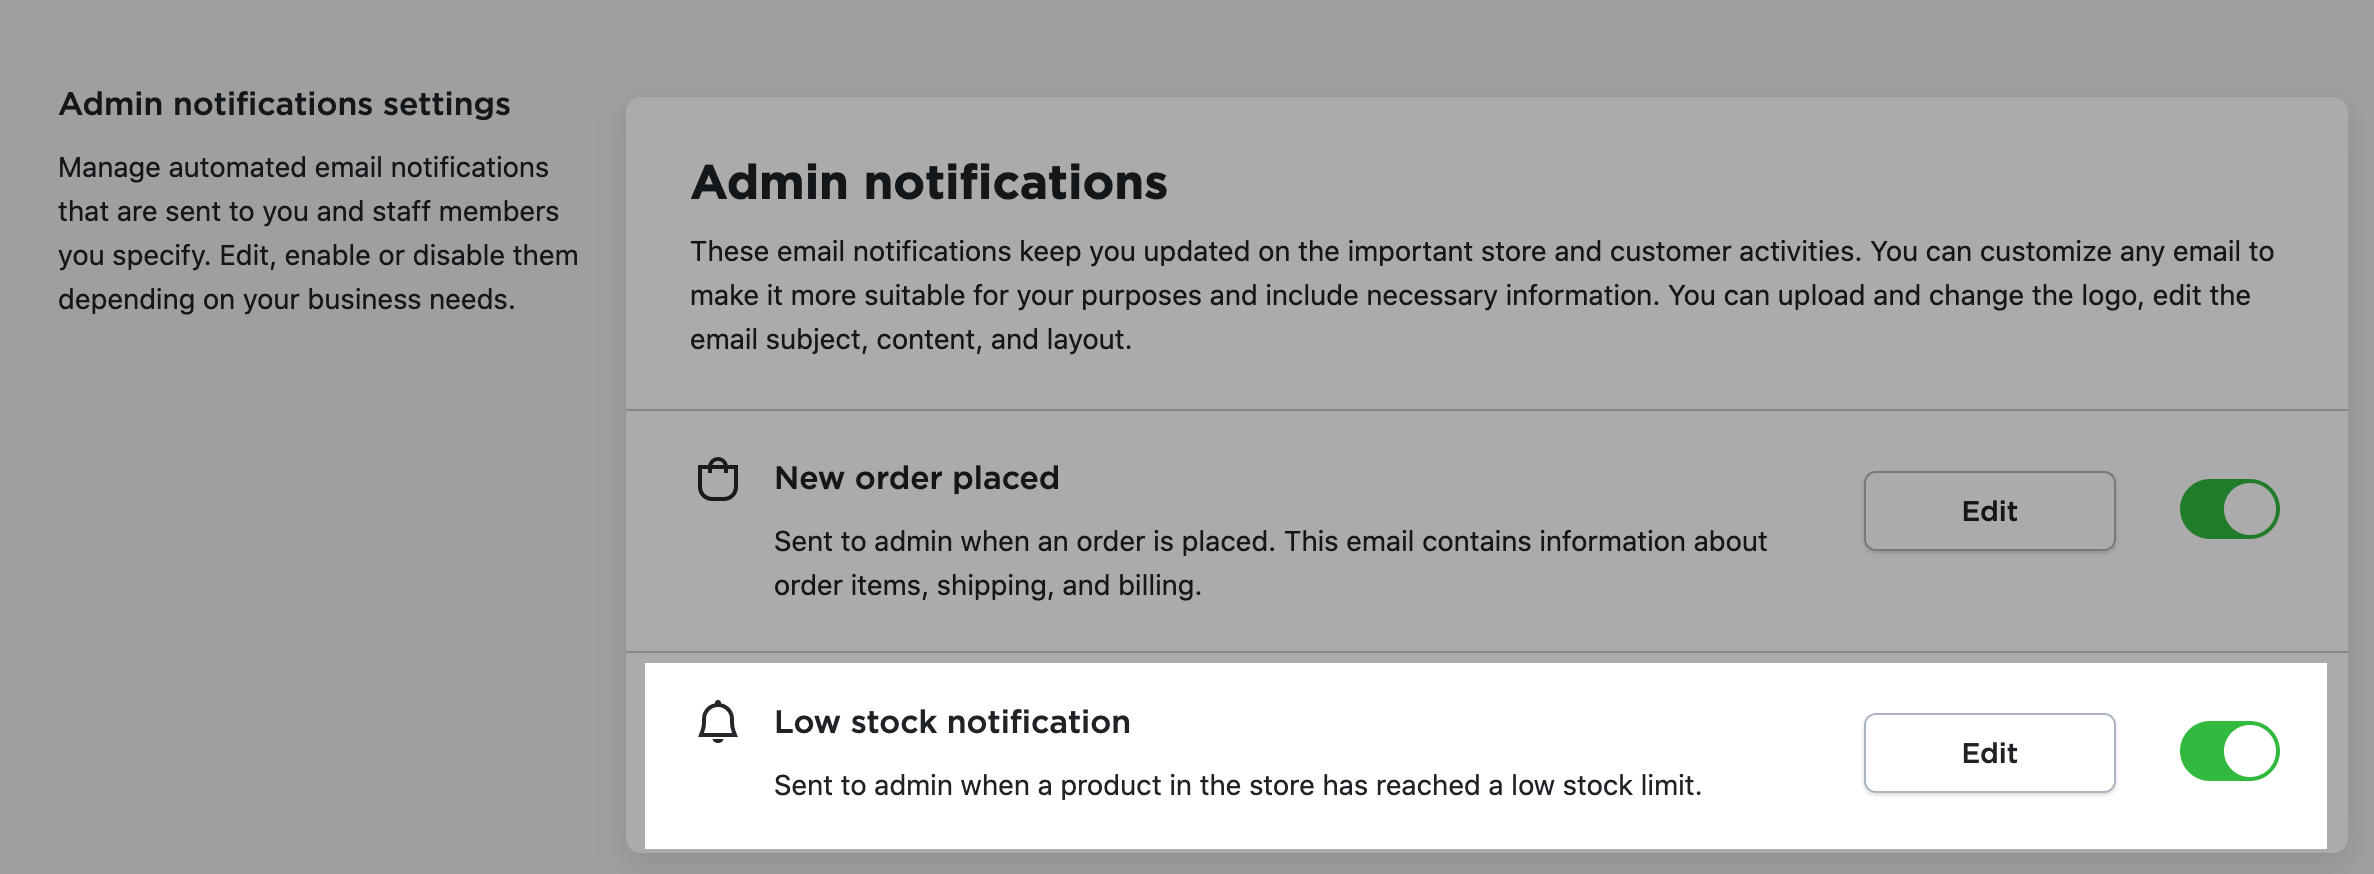 low_stock_notification.png